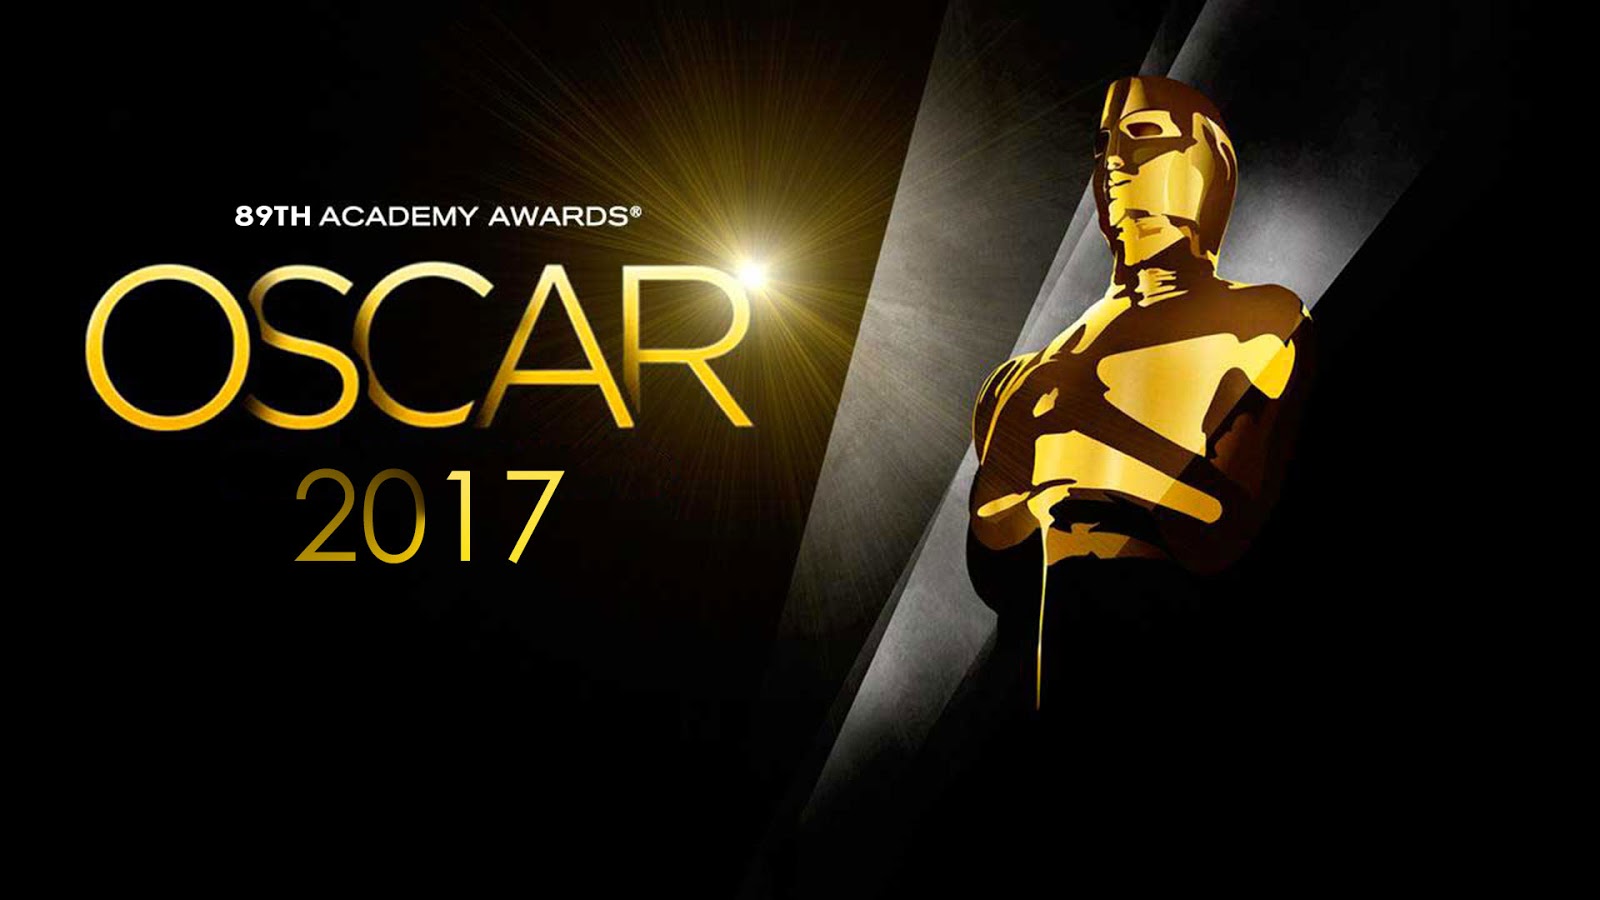 » Best Moments of The Oscars 2017